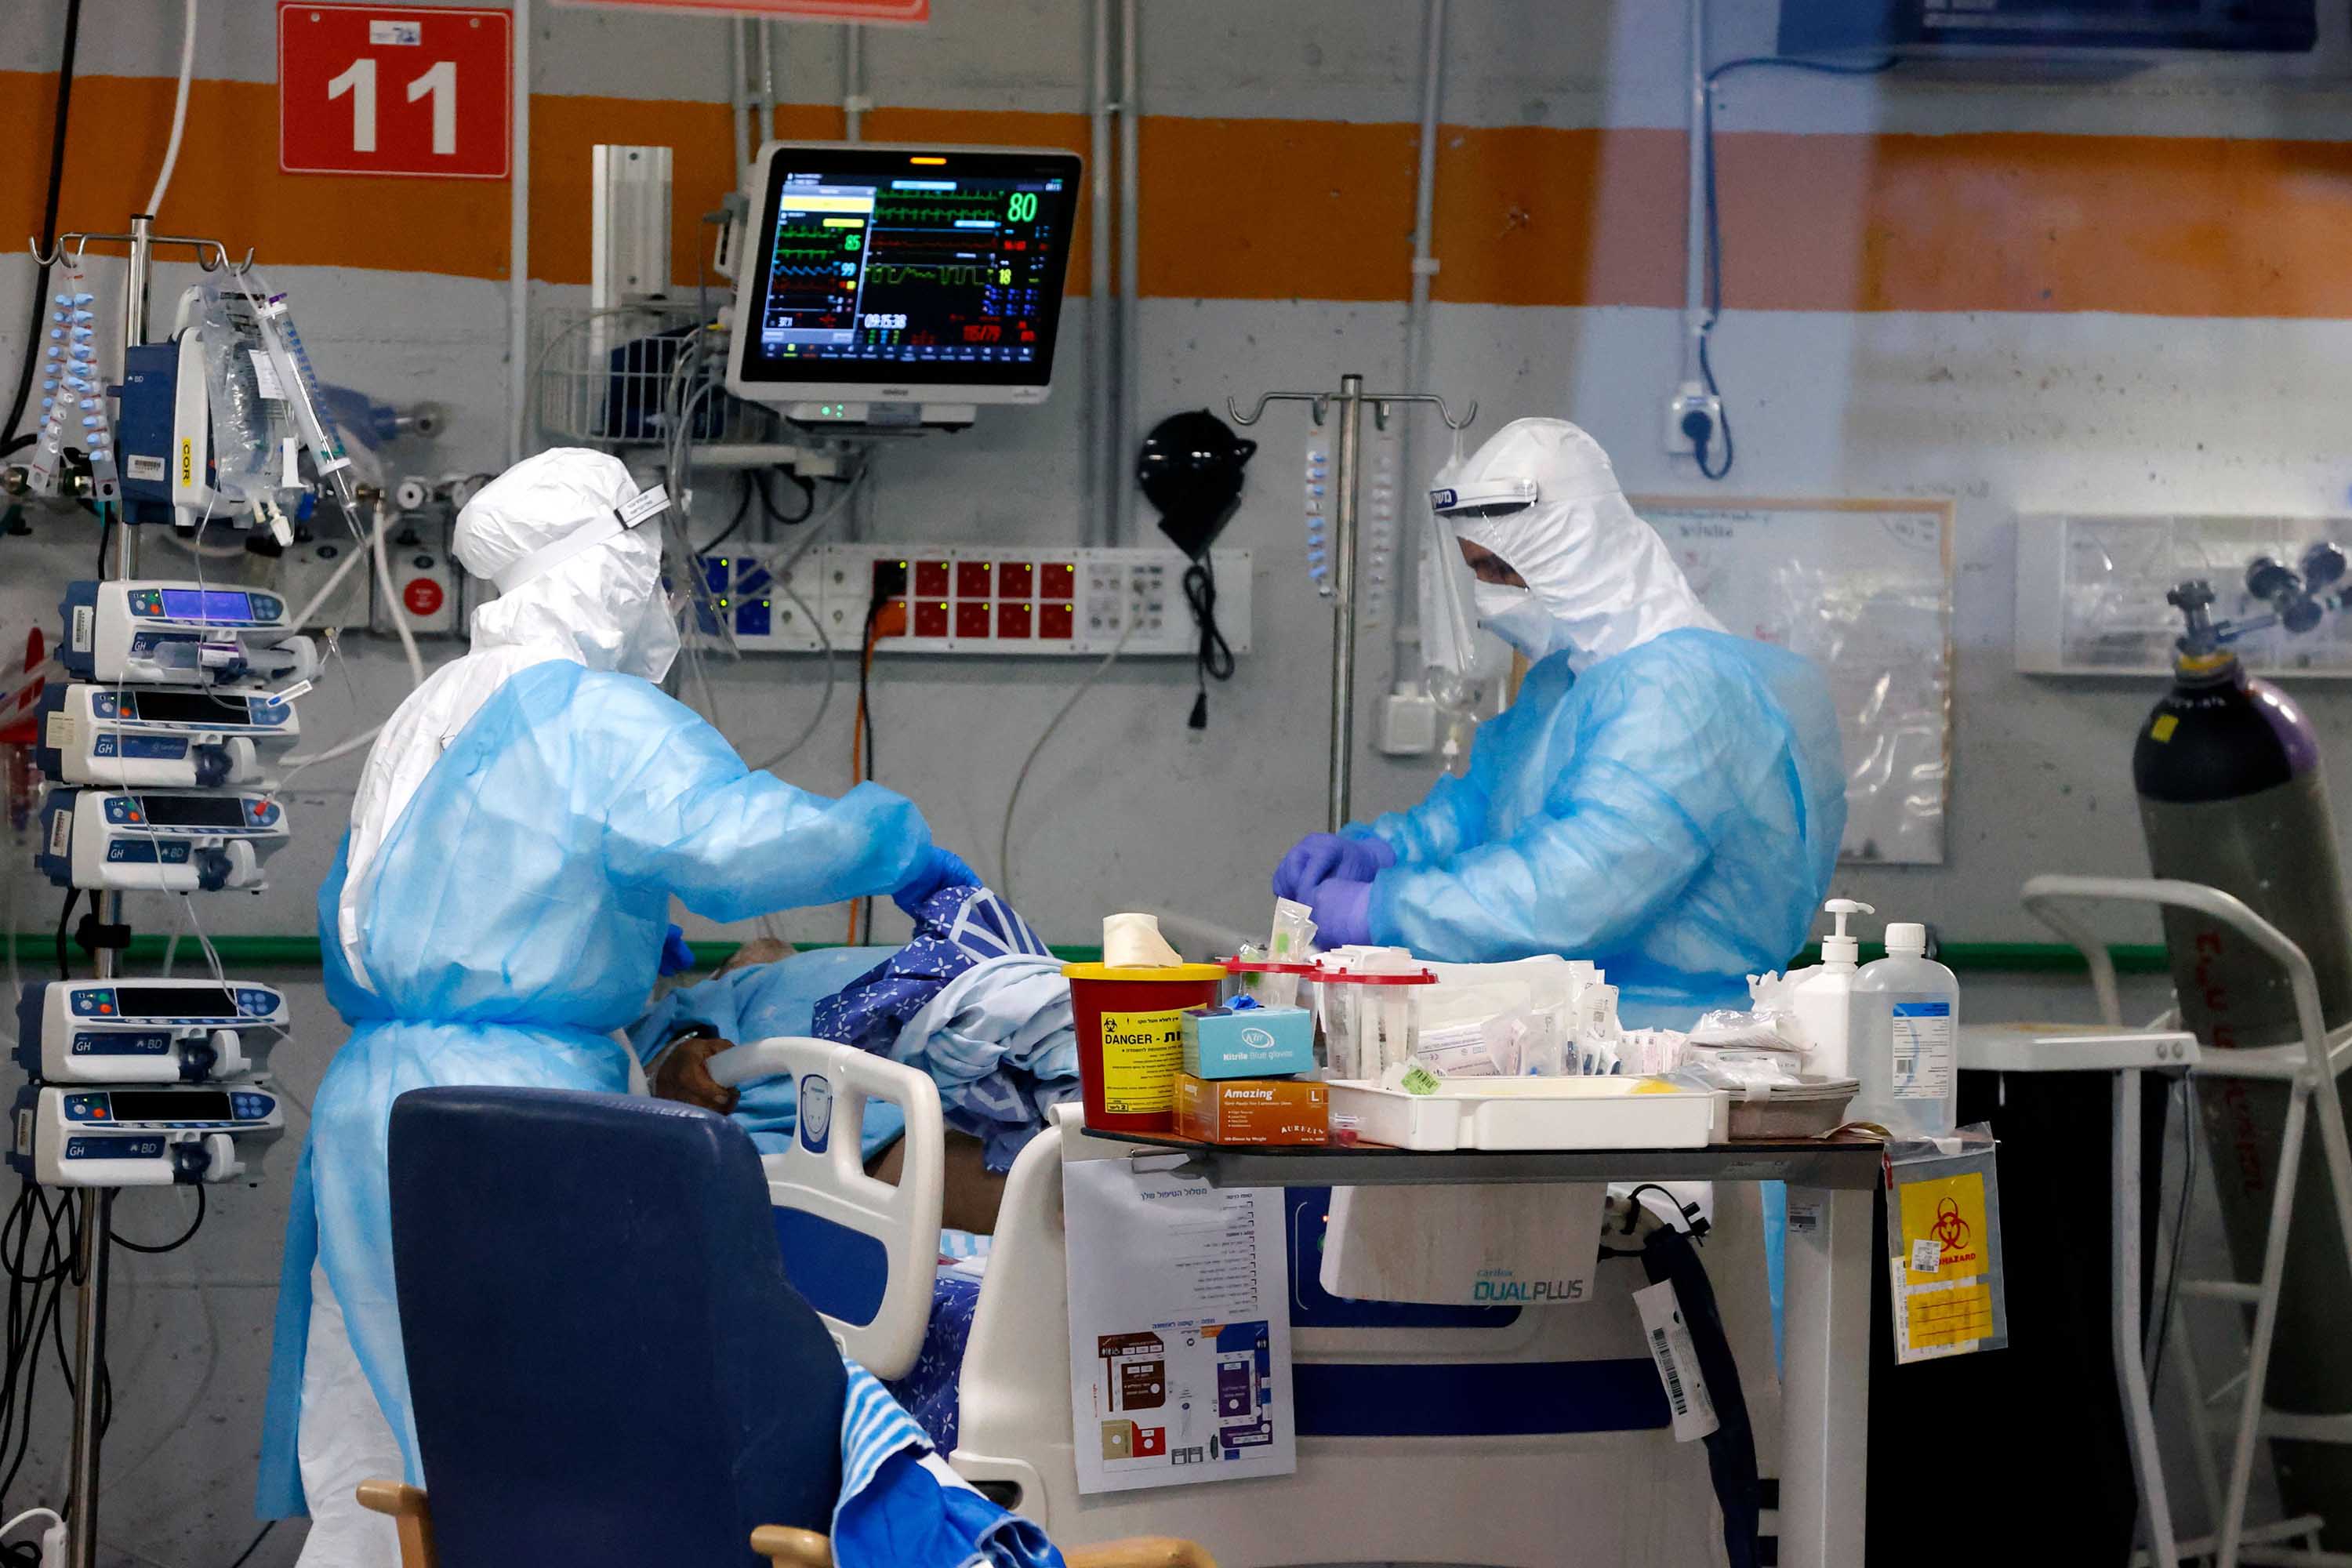 Medics care for a COVID-19 patient at the Sheba Medical Center's isolation ward, in Ramat Gan, Israel, on January 18.